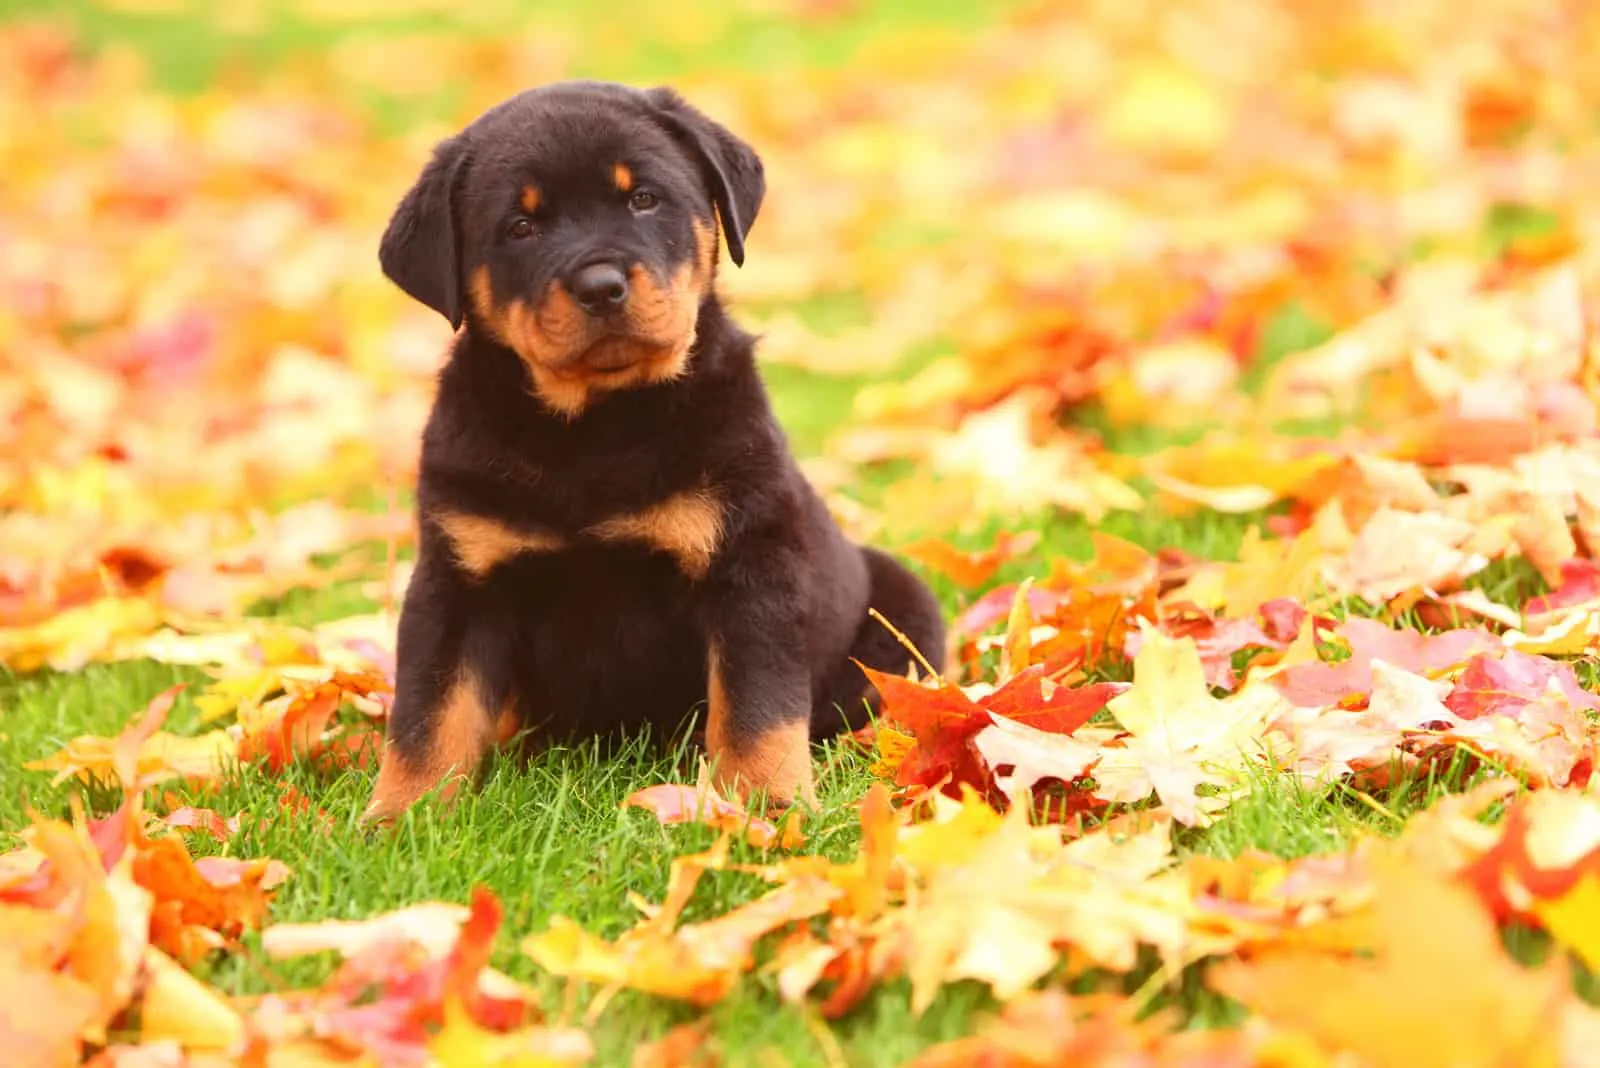 A Rottweiler puppy sits in the leaves